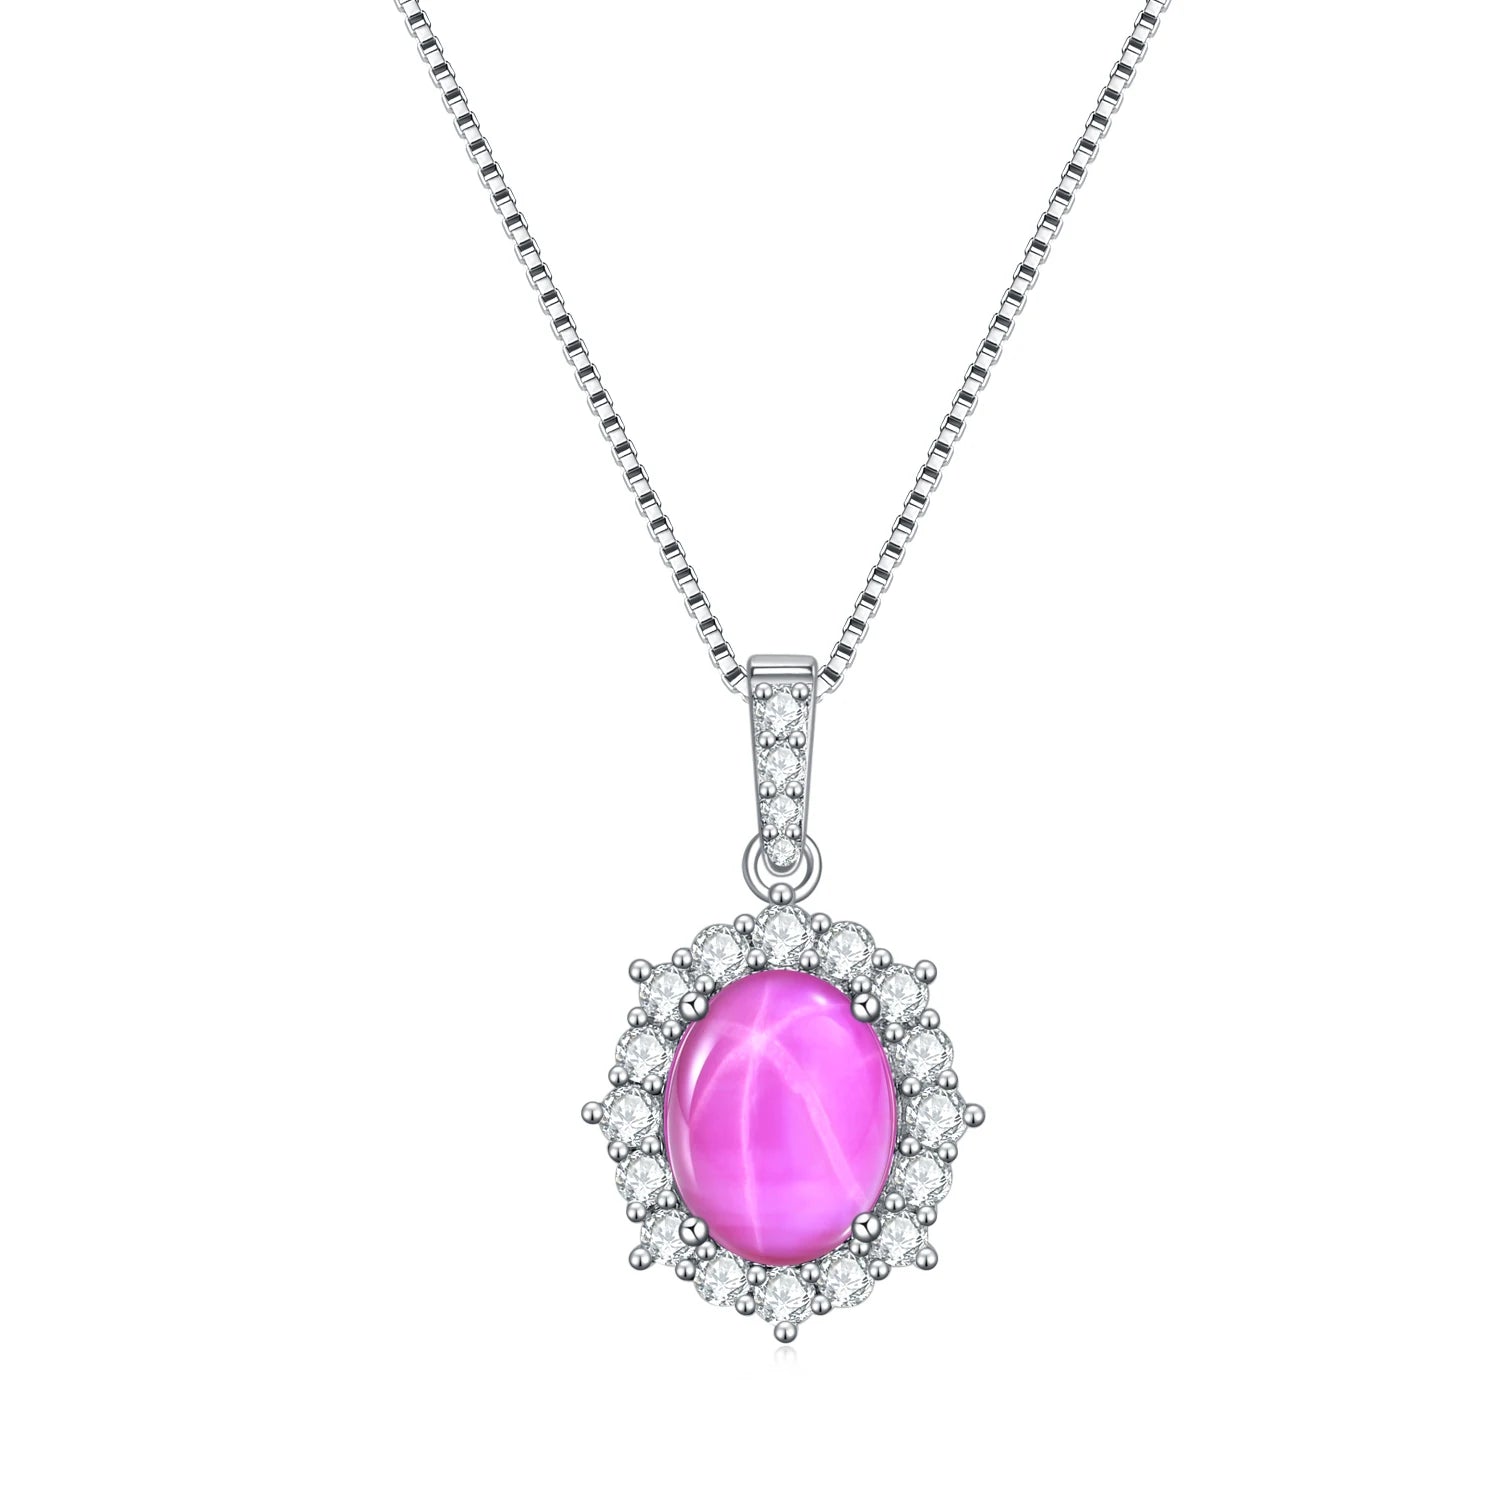 GEM'S BALLET Dainty Blue Lindy Star Sapphire Statement Pendant Necklace in 925 Sterling Silver Gift For Her Mothers Day Gifts Lab Star Ruby 925 Sterling Silver 45cm | CHINA